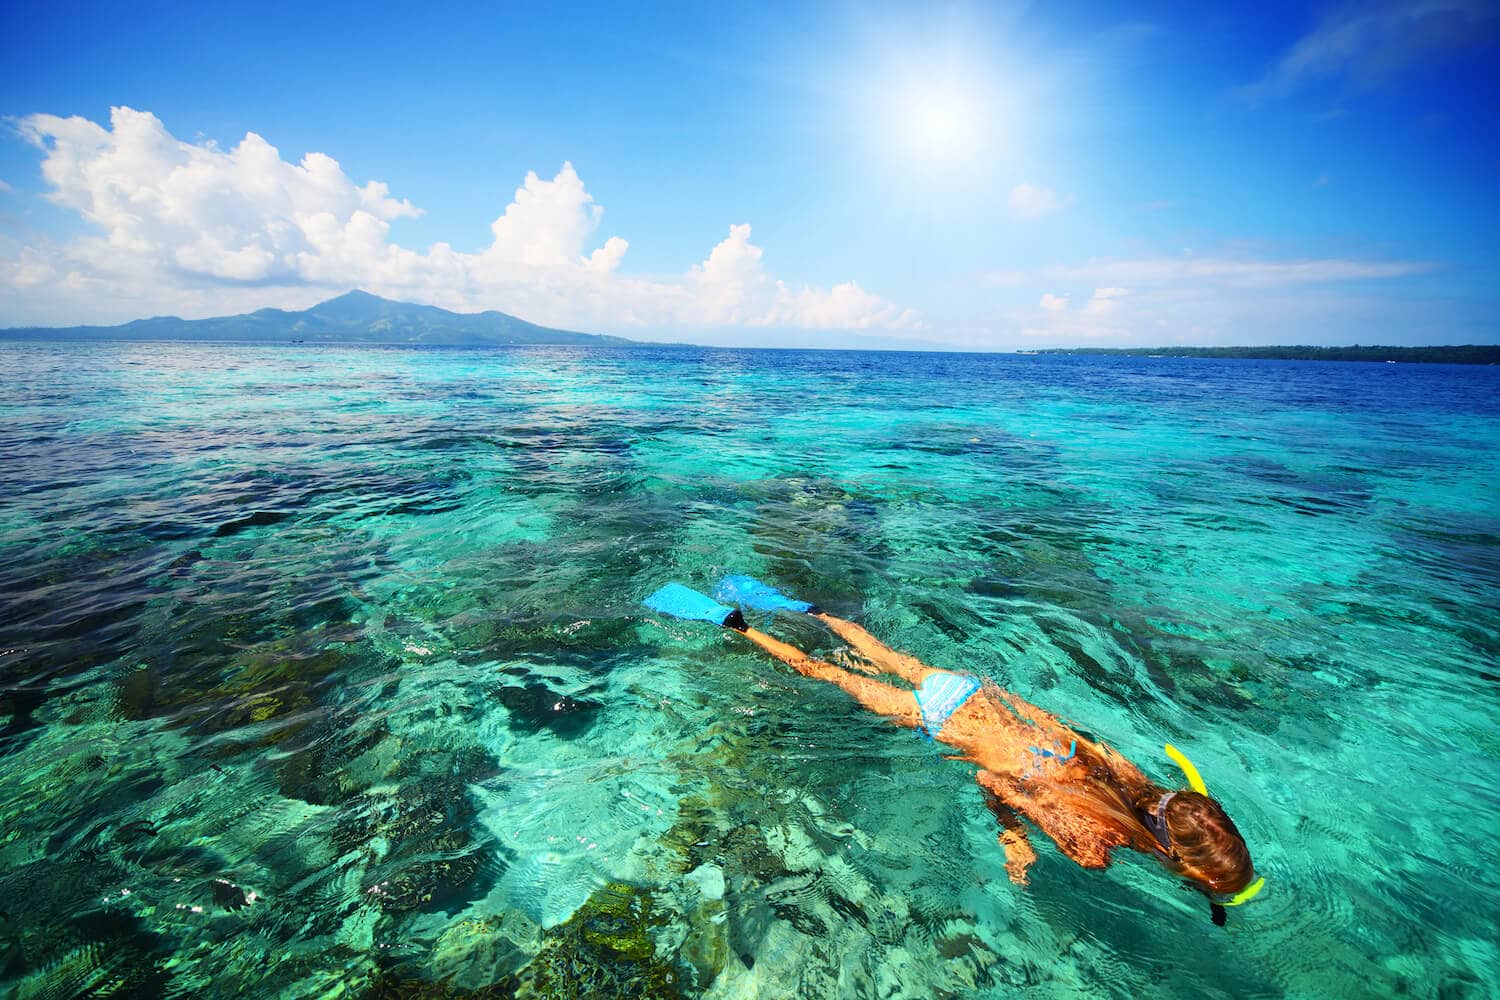 A woman snorkelling in the ocean over coral reef.